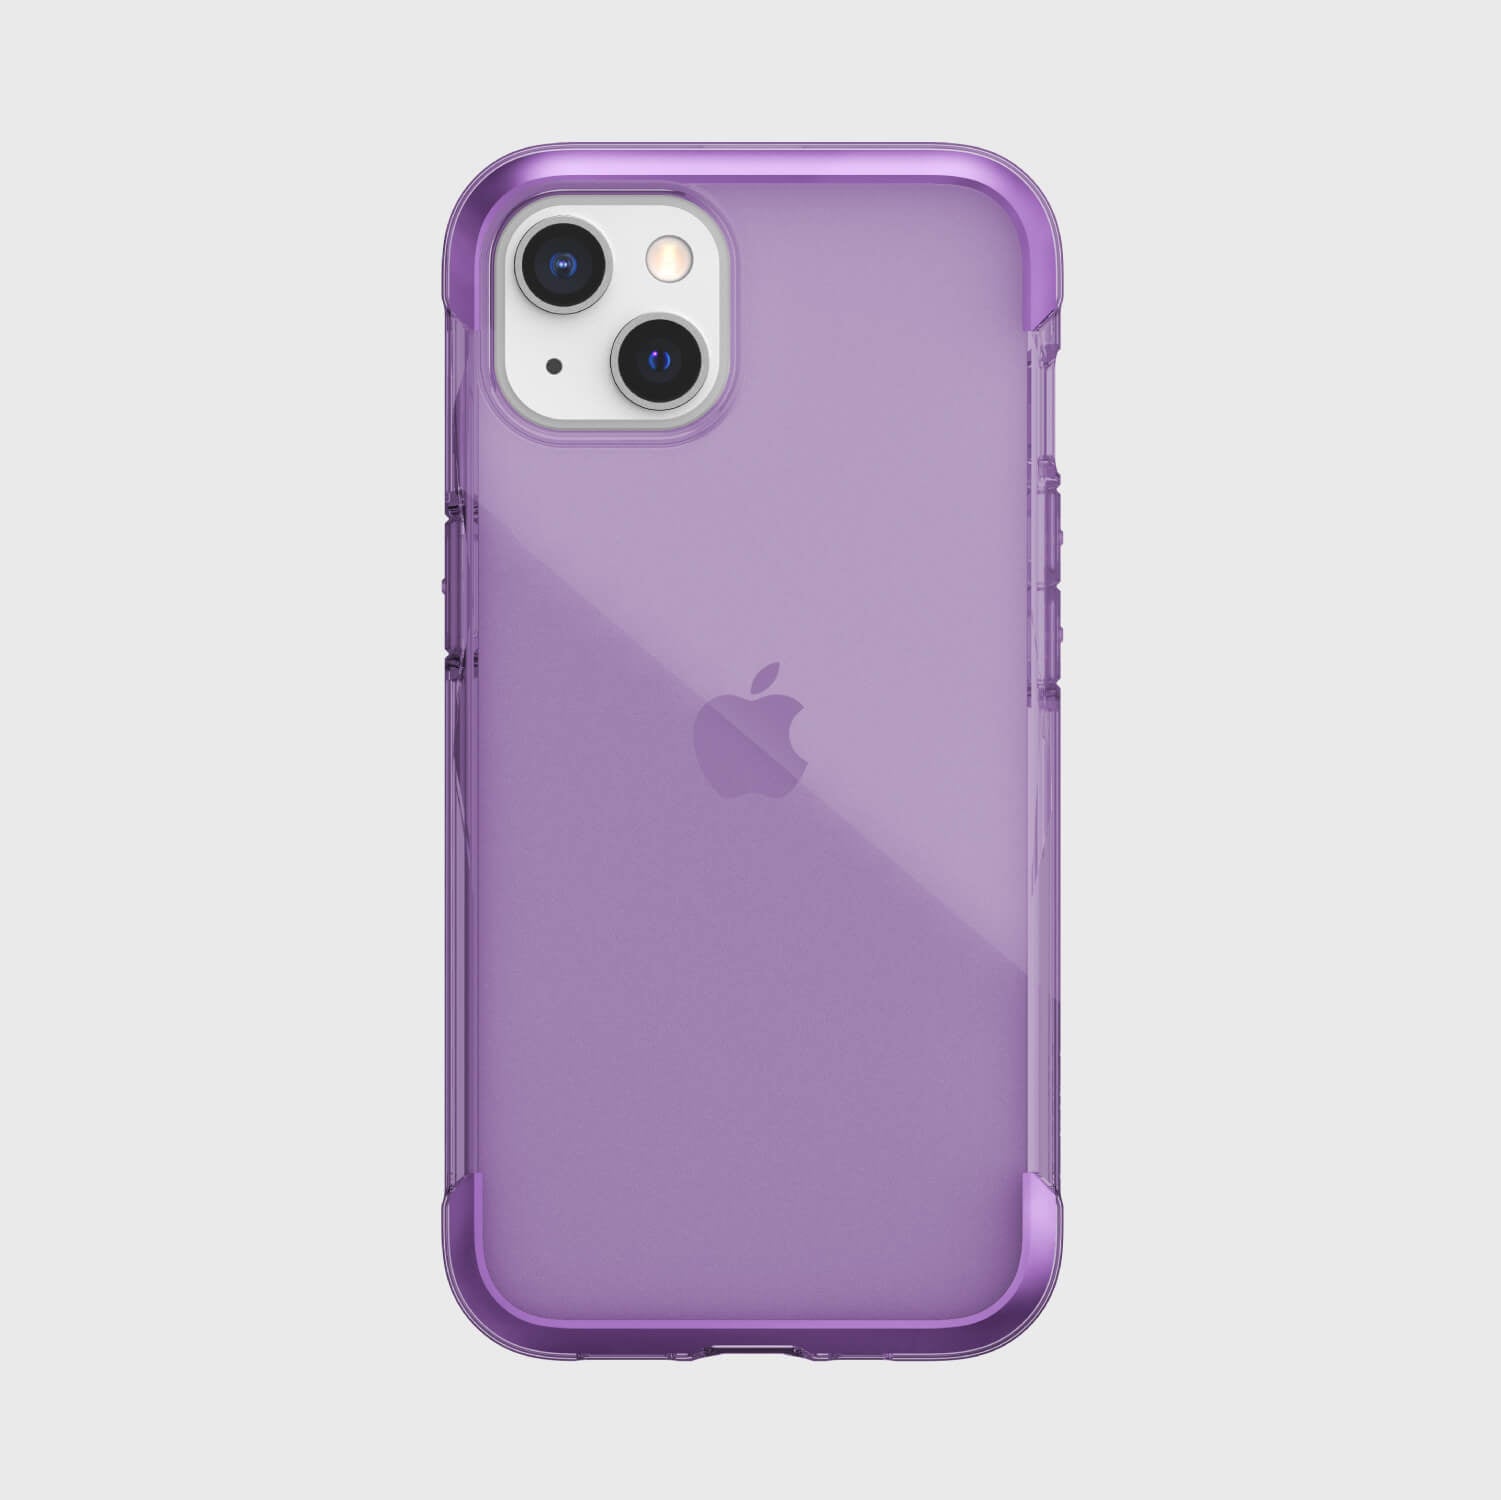 The purple iPhone 13 Case - AIR by Raptic, providing 13 foot drop protection, is showcased on a white background.